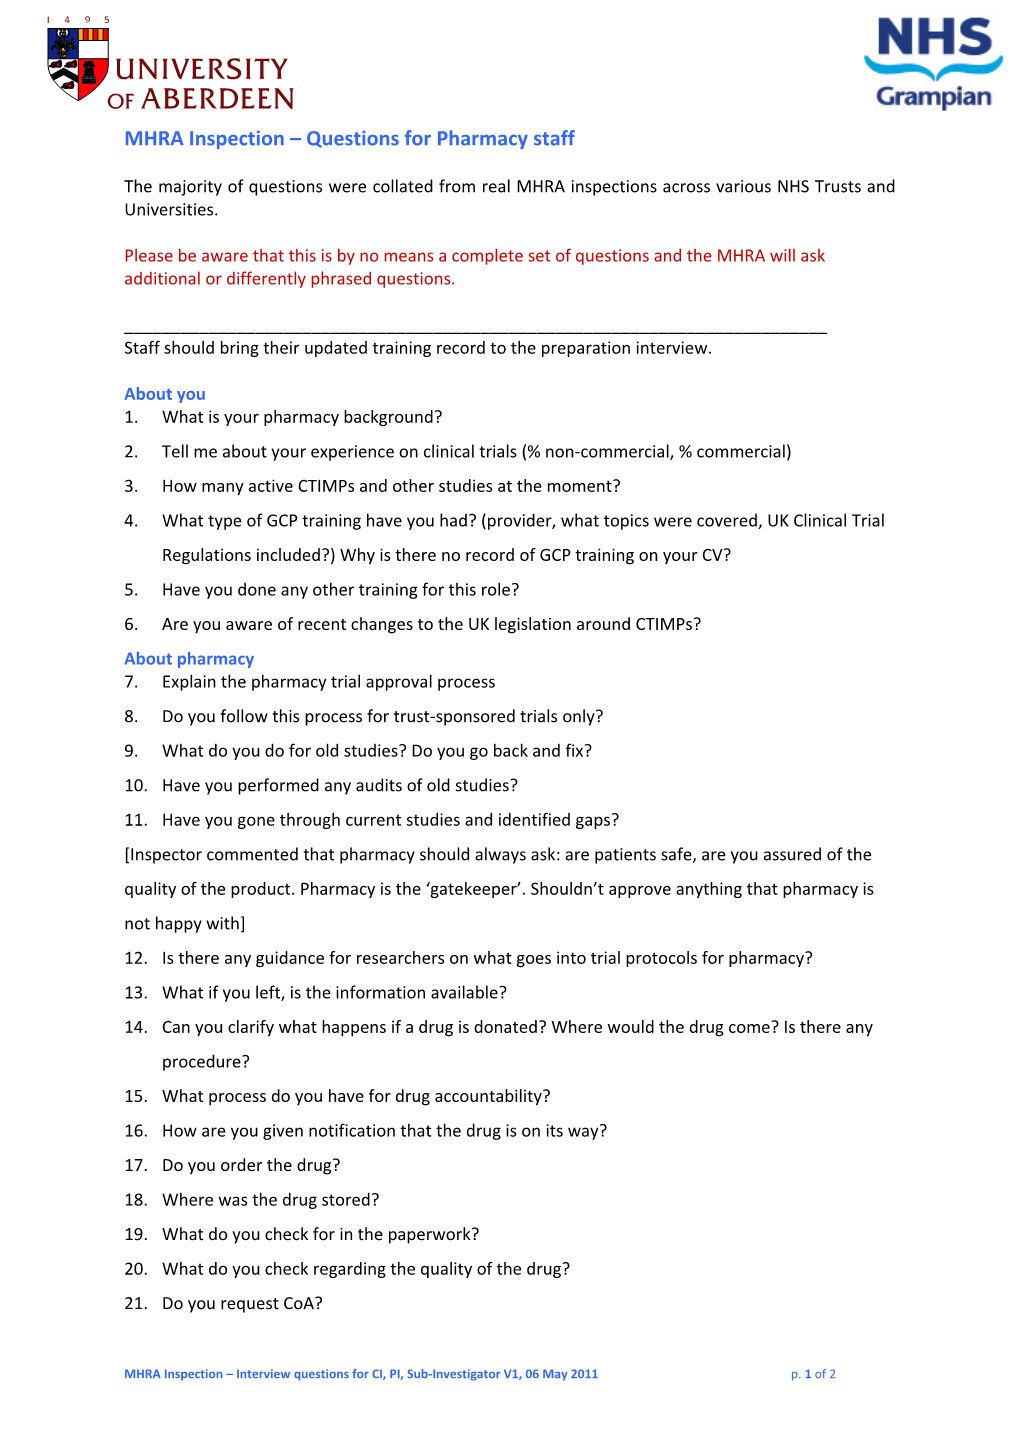 MHRA Inspection 100 Questions for Chief, Principal and Sub-Investigators